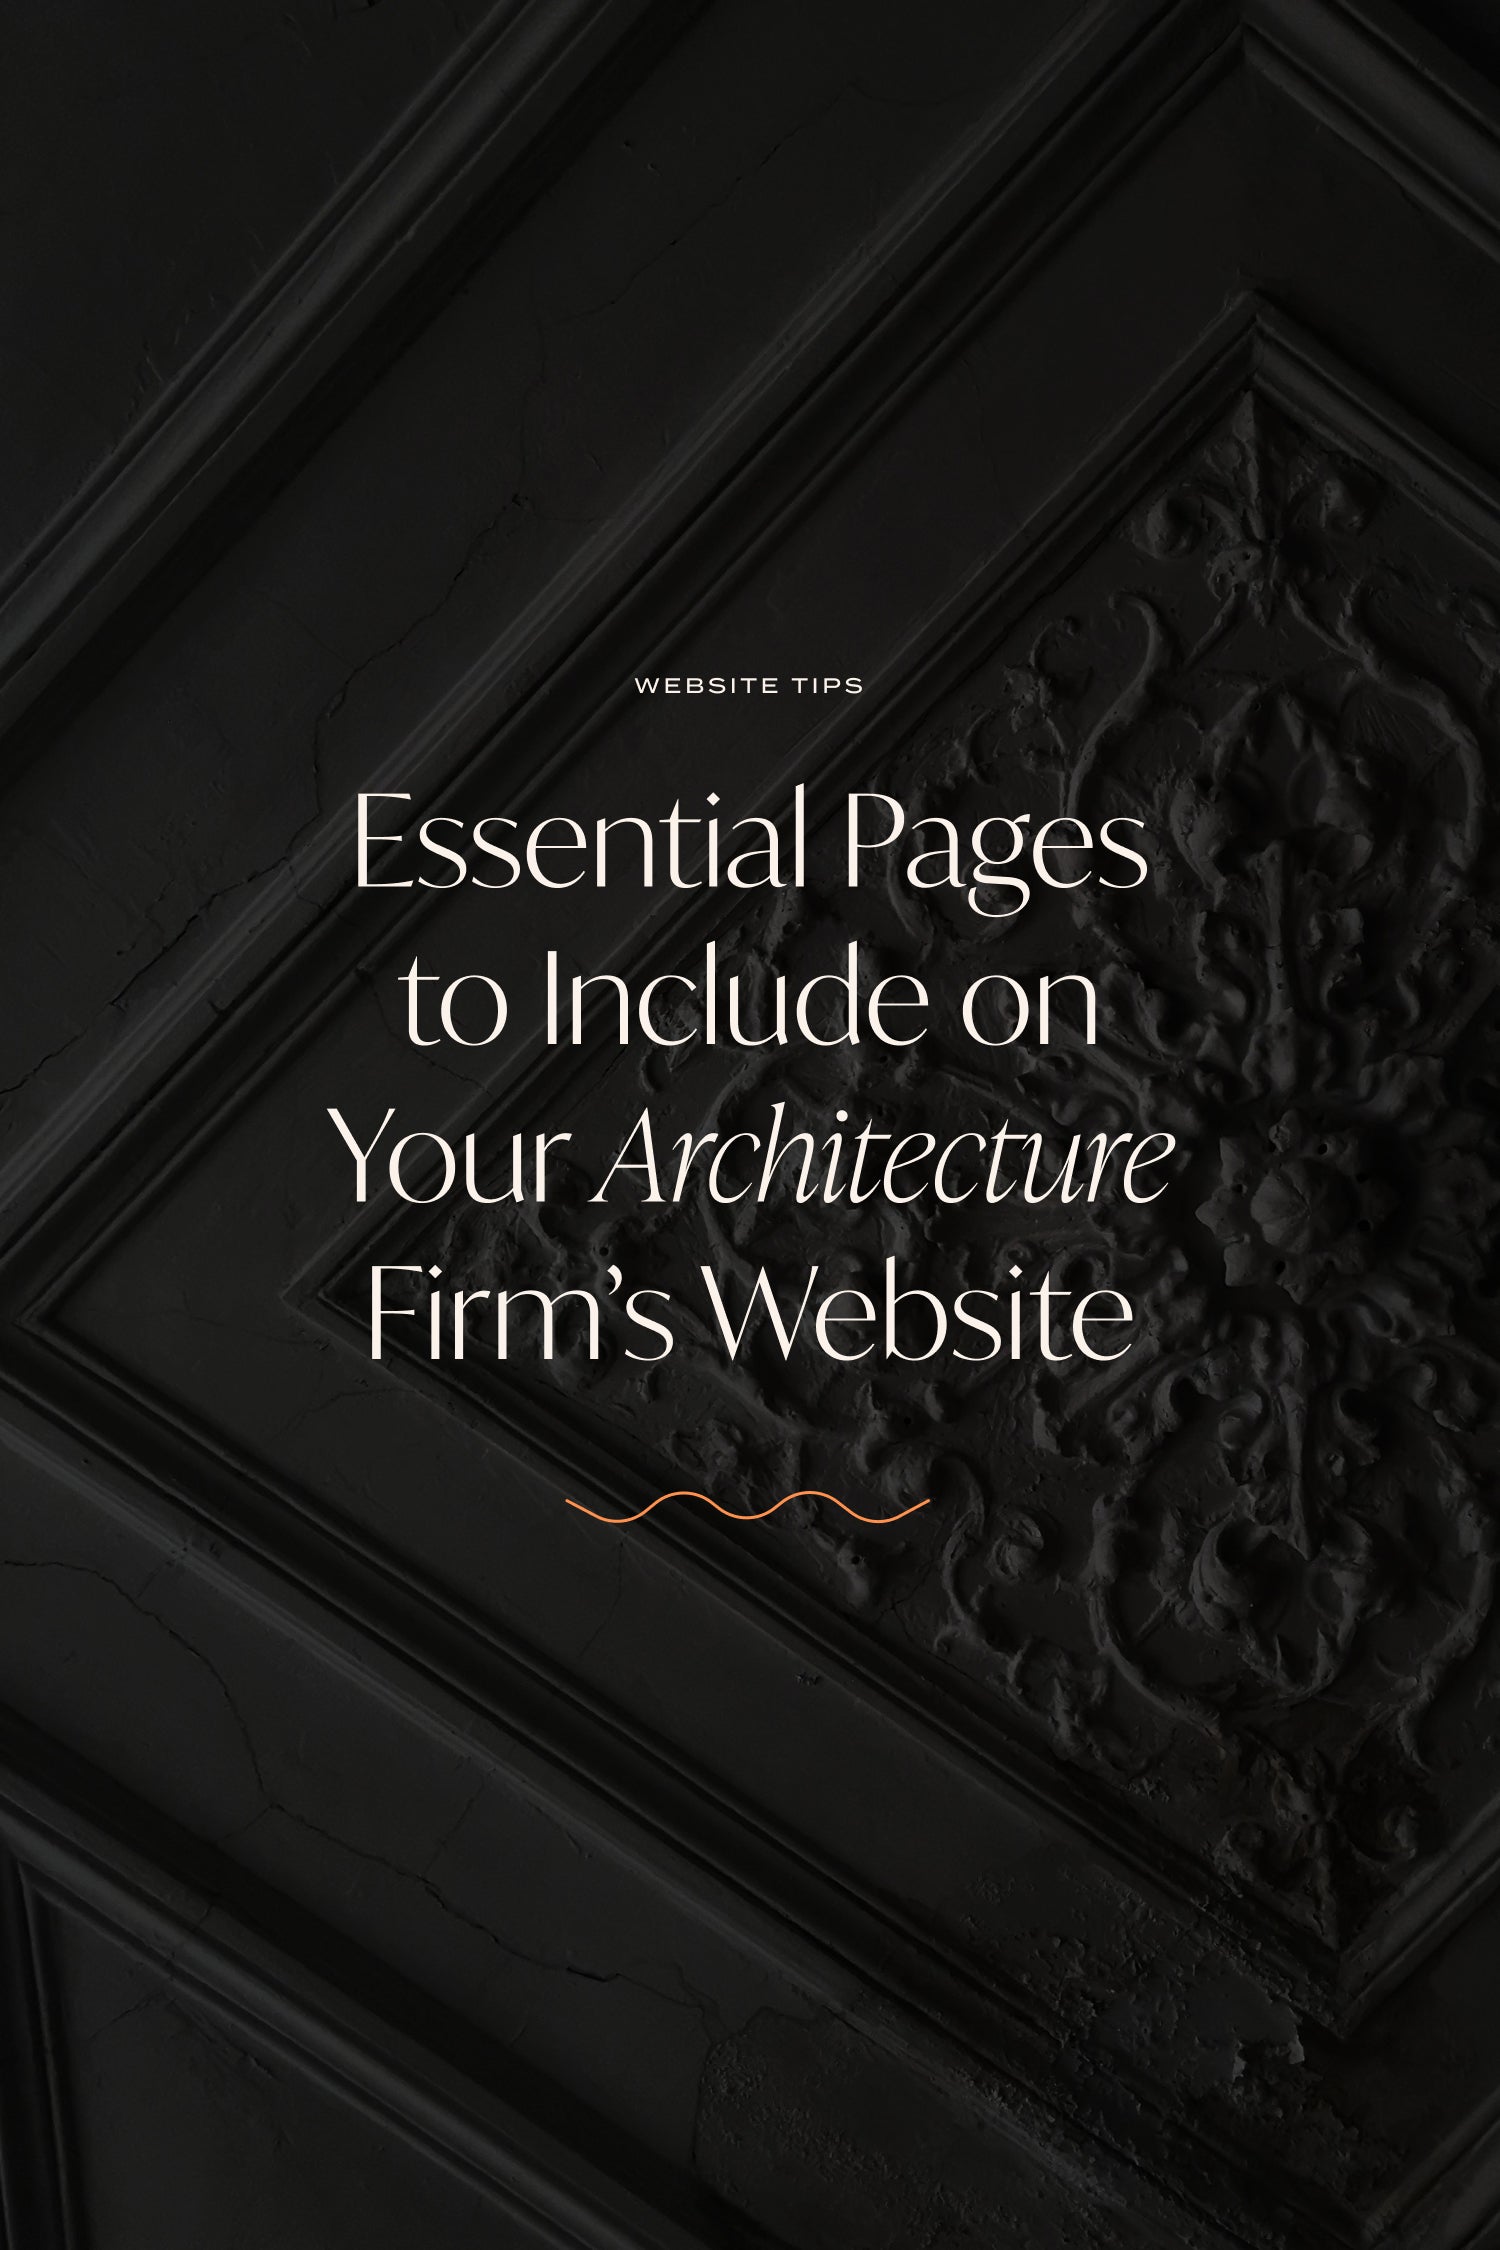 Essential Pages to Include on Your Architecture Firm’s Website